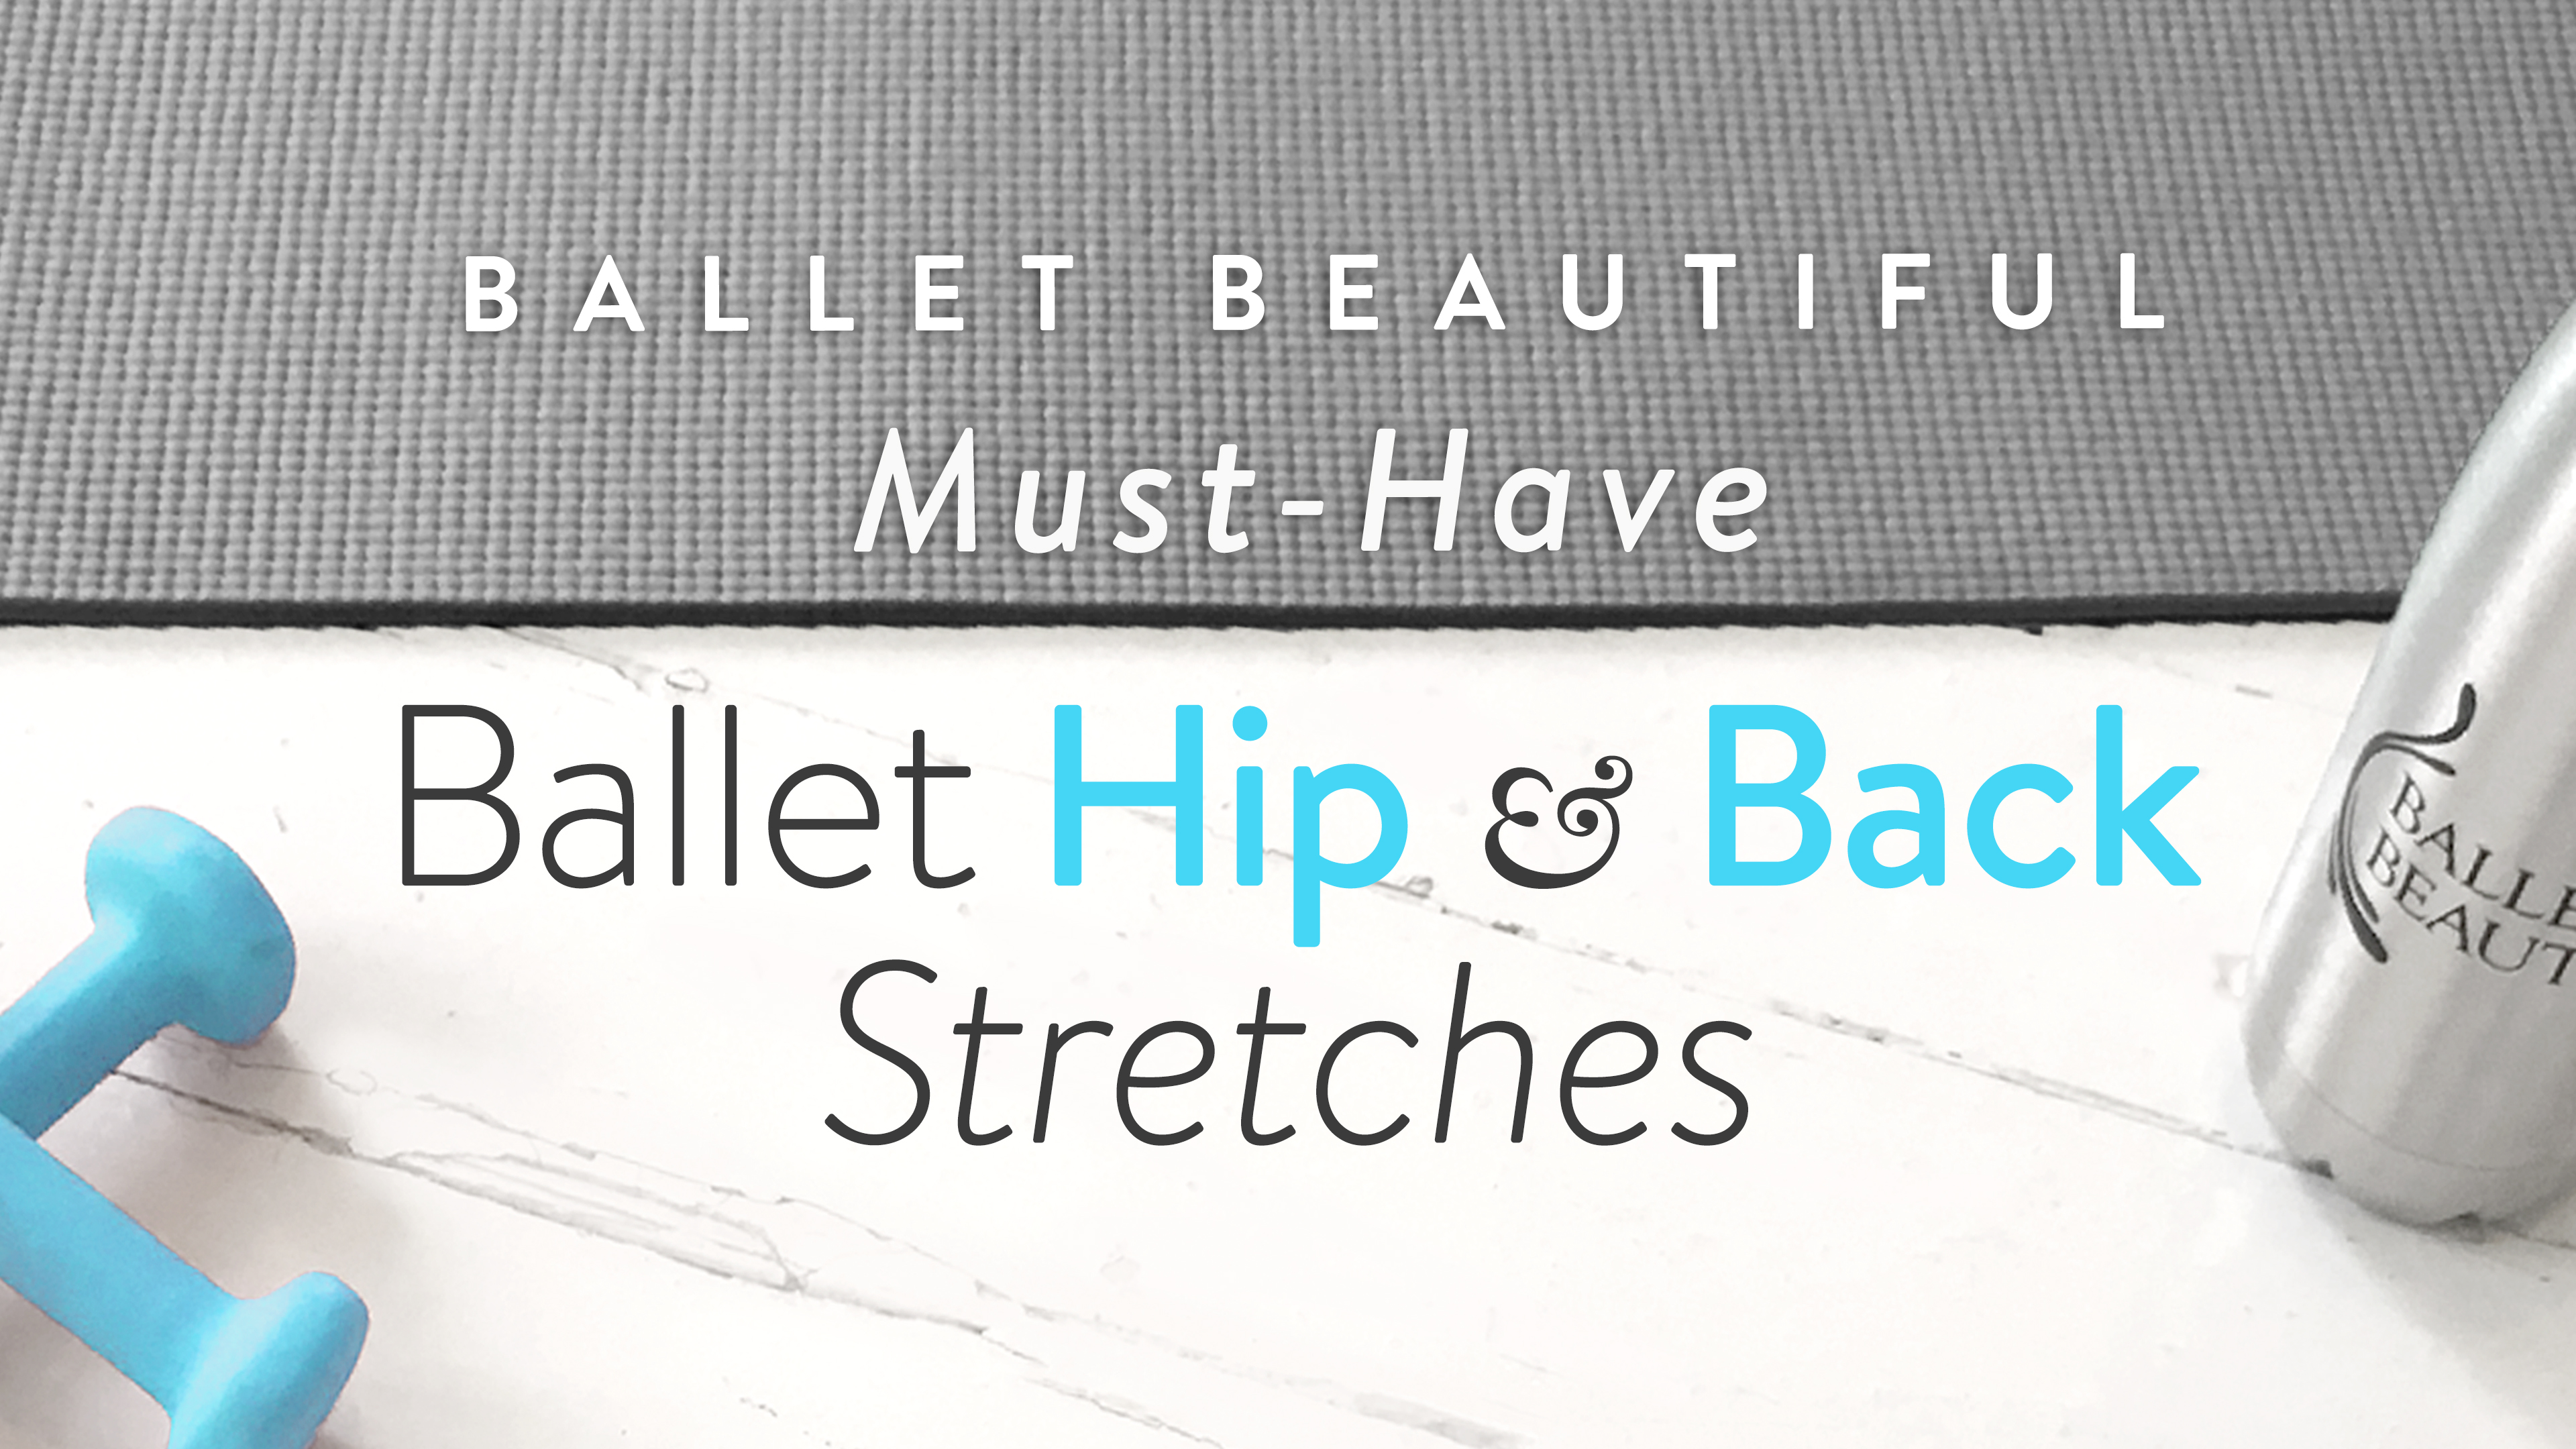 Must Have Ballet Hip & Back Stretches